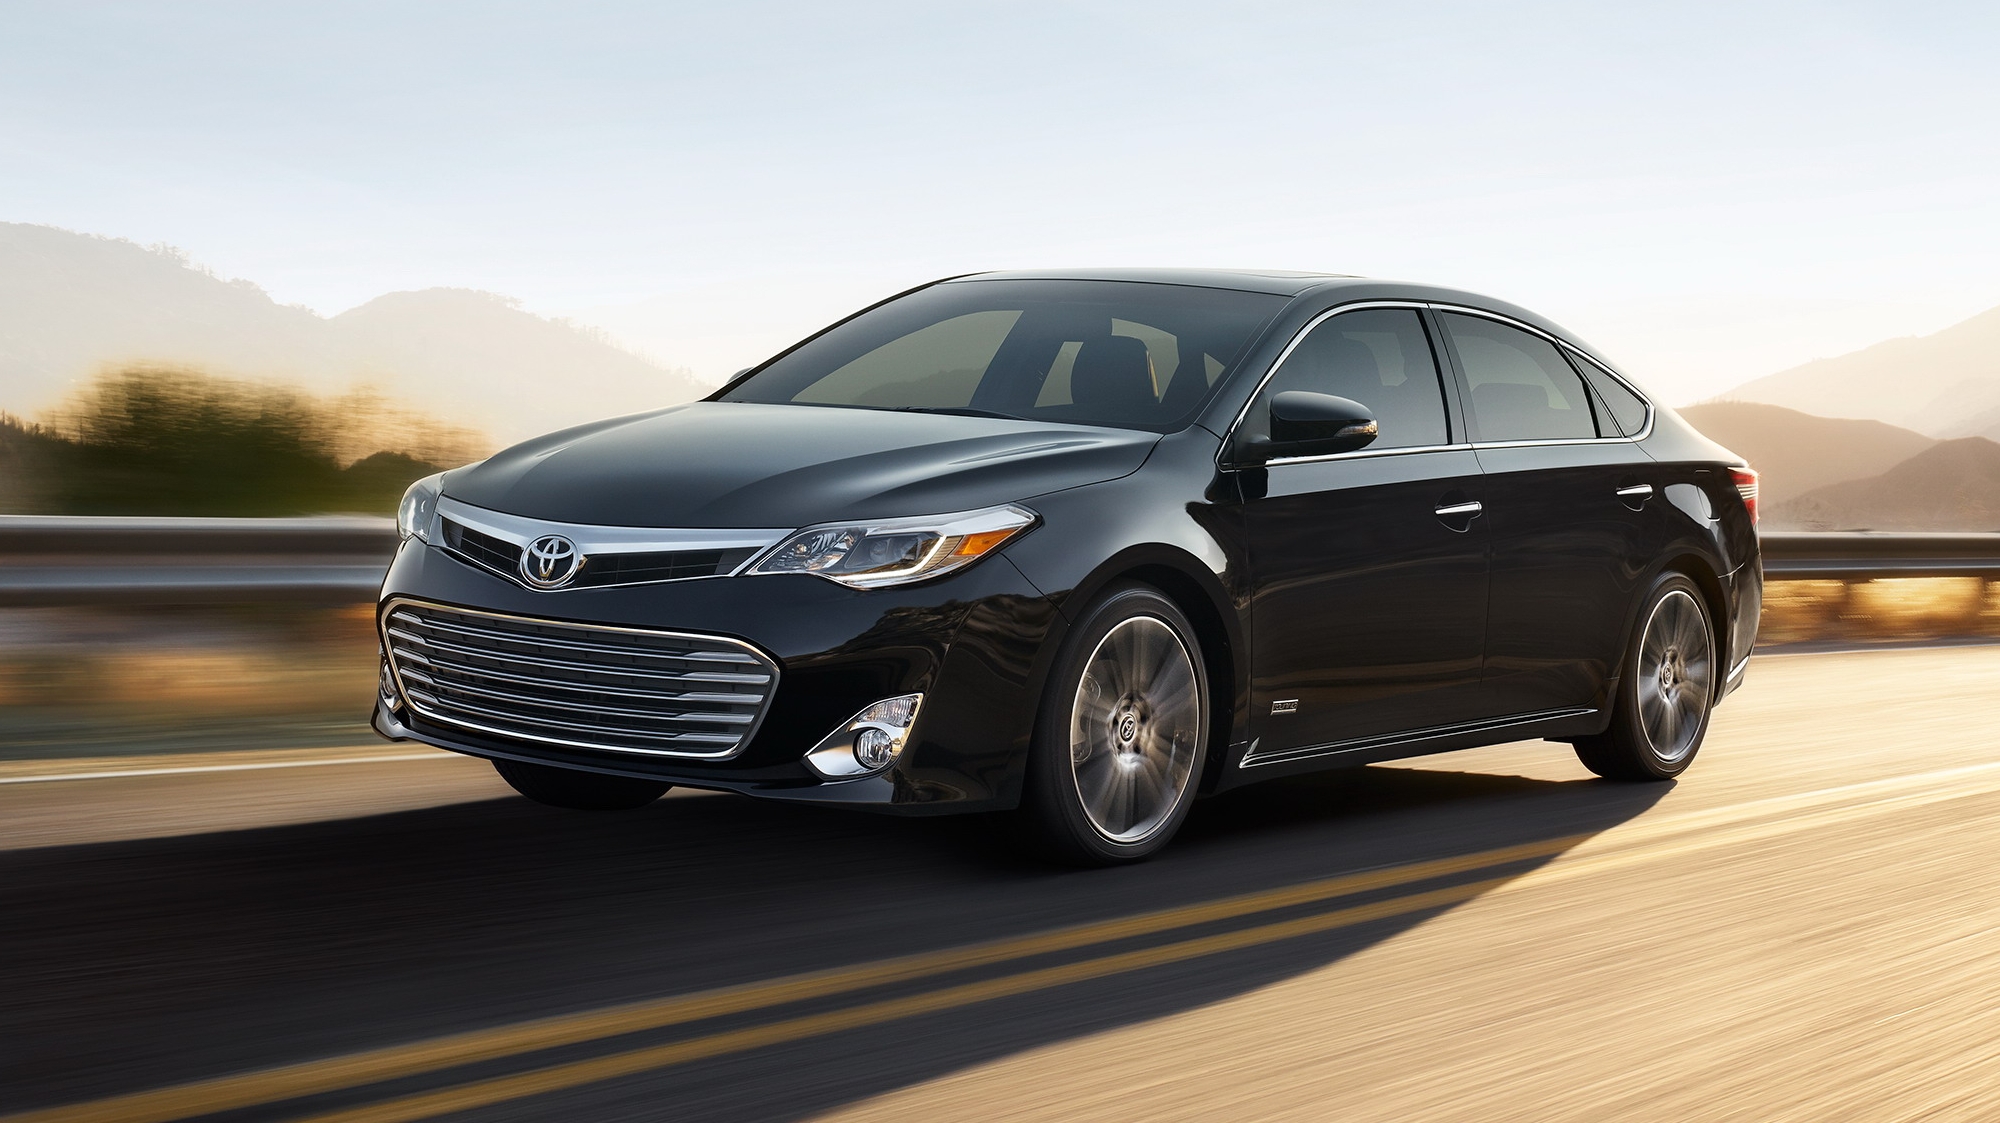 Toyota Avalon XLE Touring Sport Edition Picture, Photo